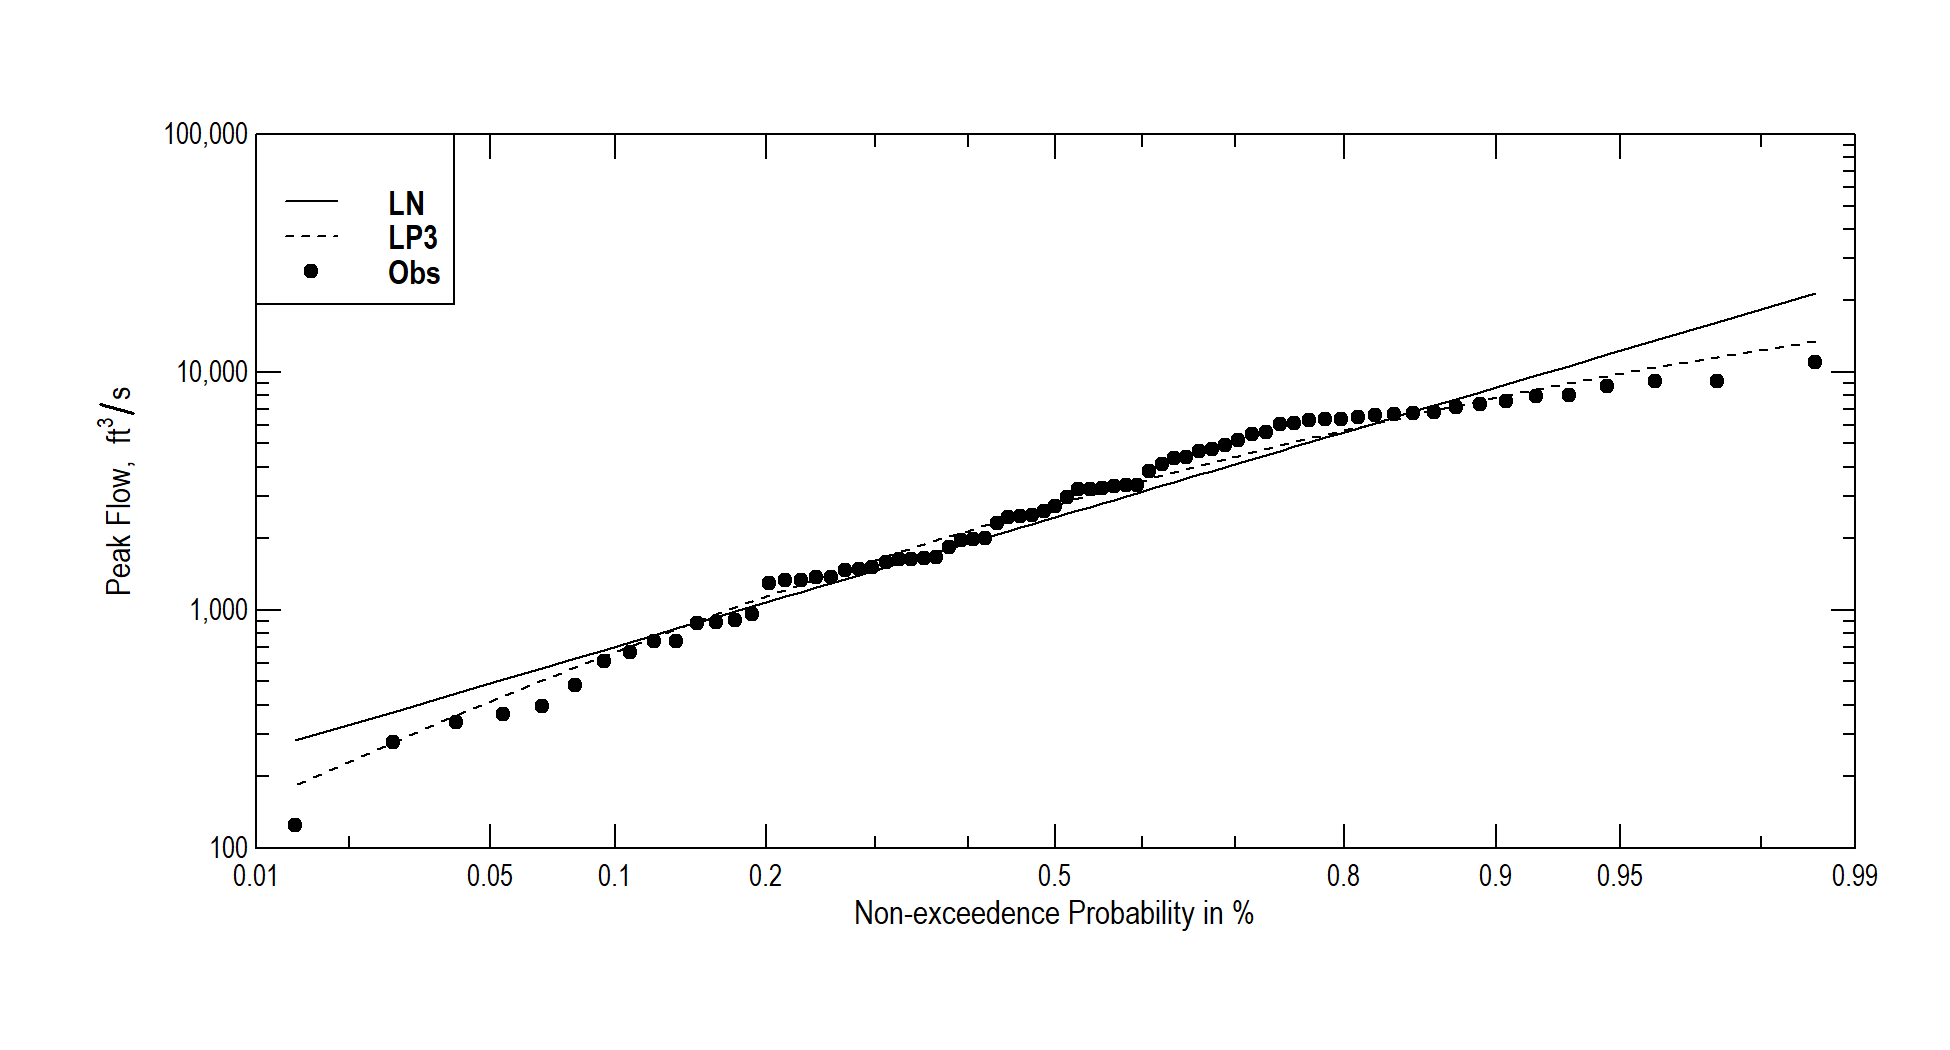 Probability plot for USGS gauge 11169000 for years 1930-2002.